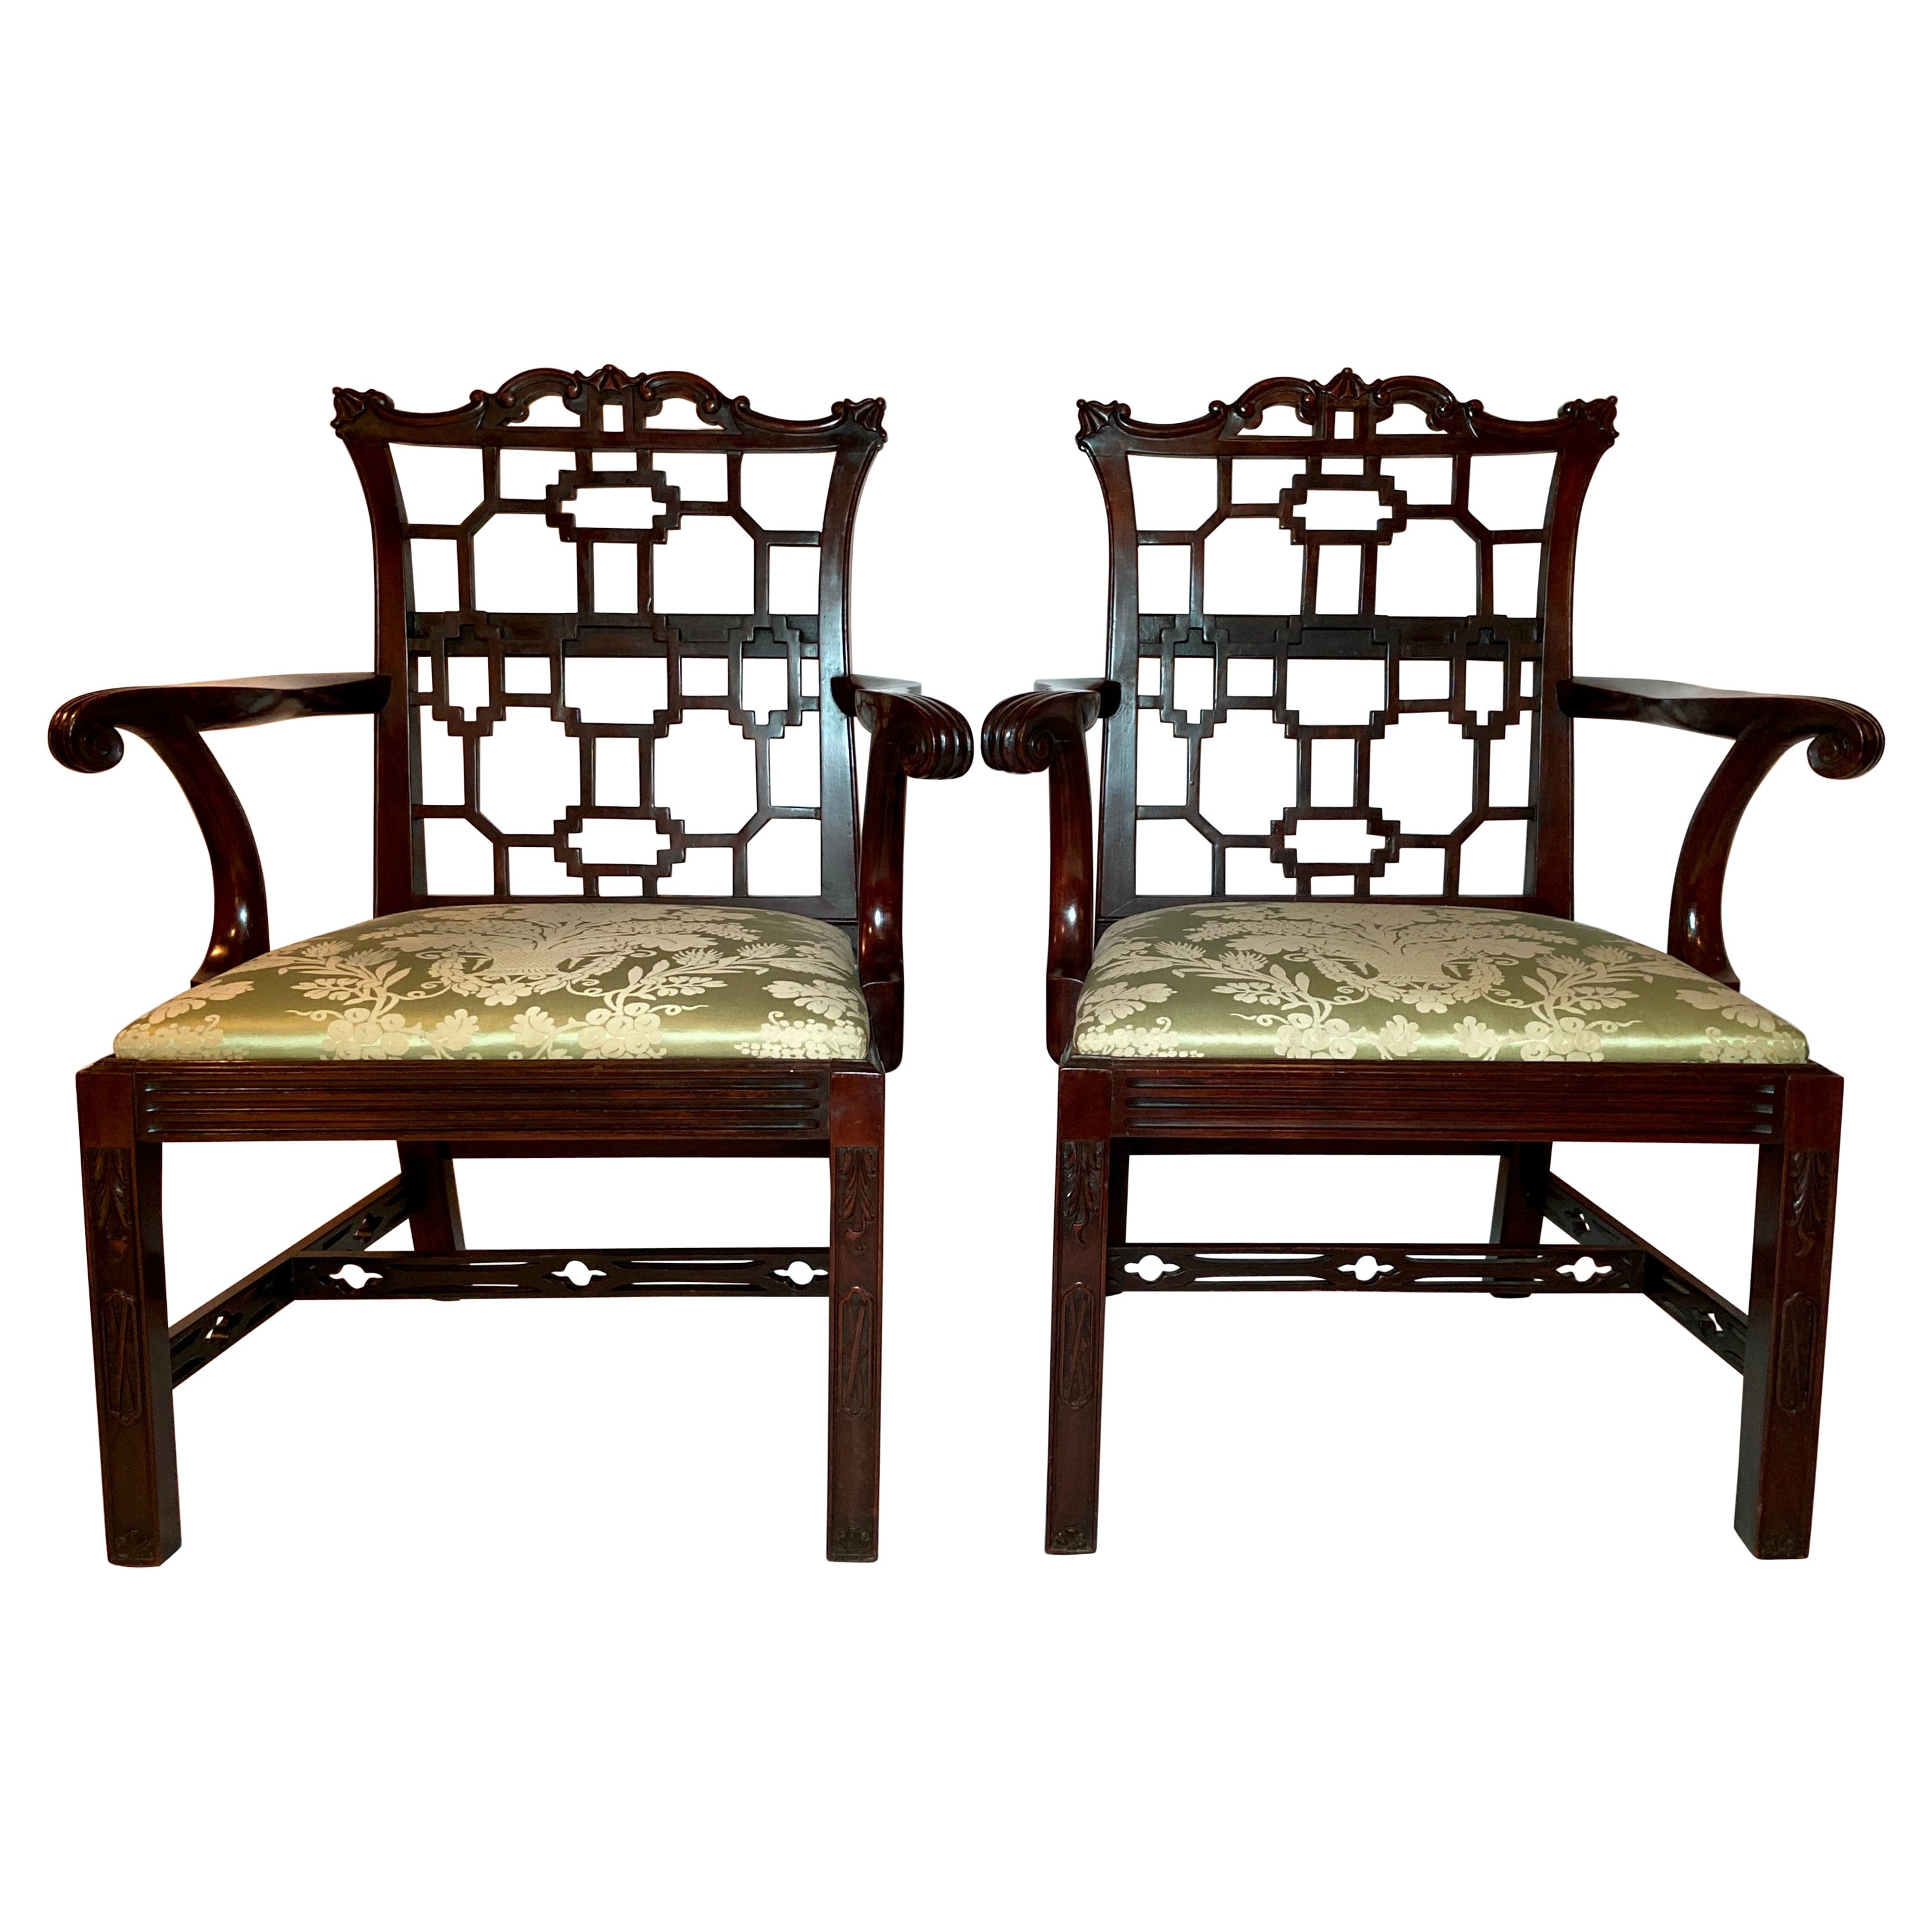 Pair Antique English Chippendale Mahogany Armchairs, circa 1865-1875